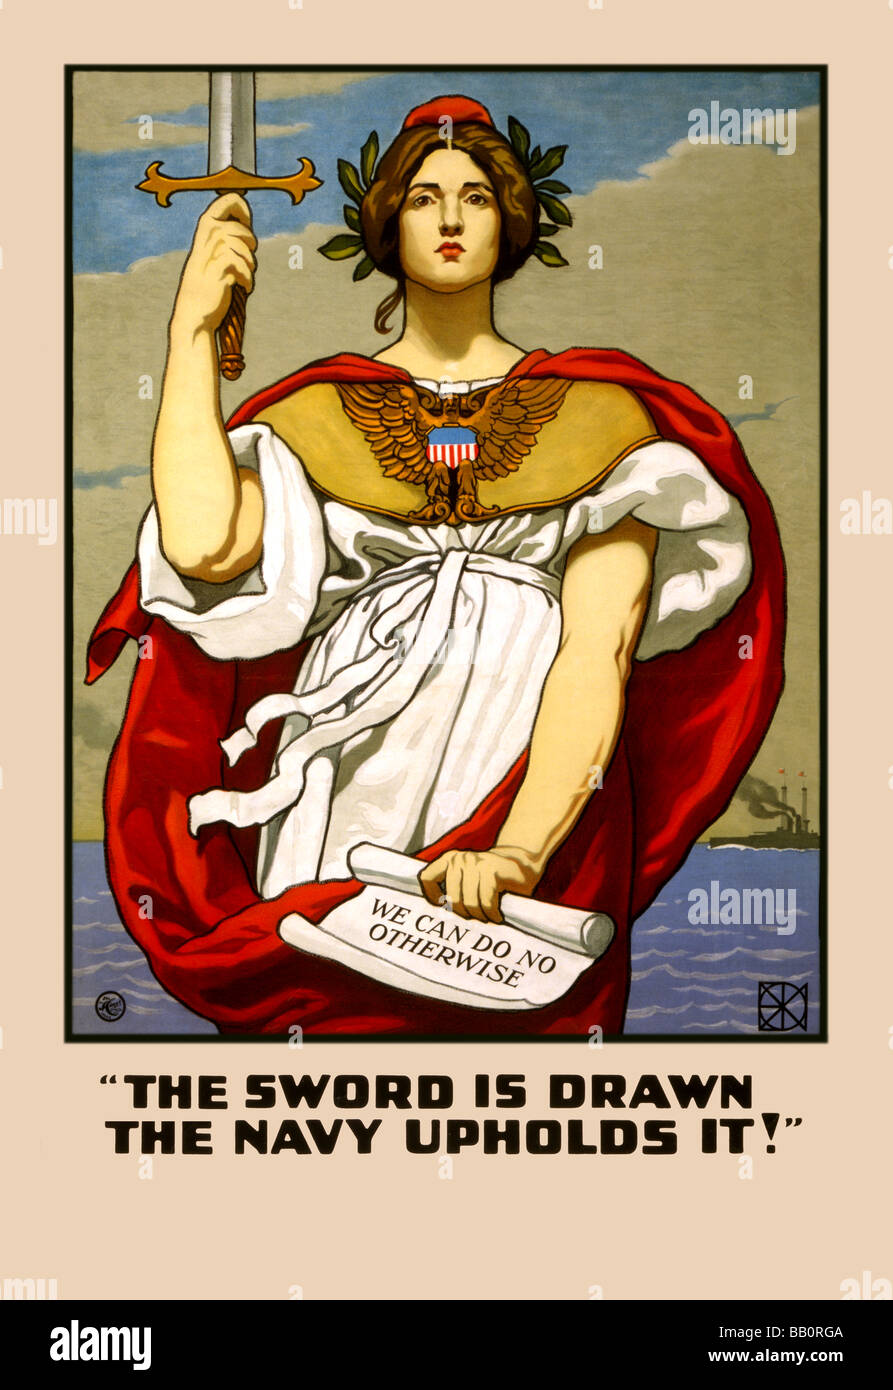 The Sword in Drawn,The Navy Upholds It! Stock Photo